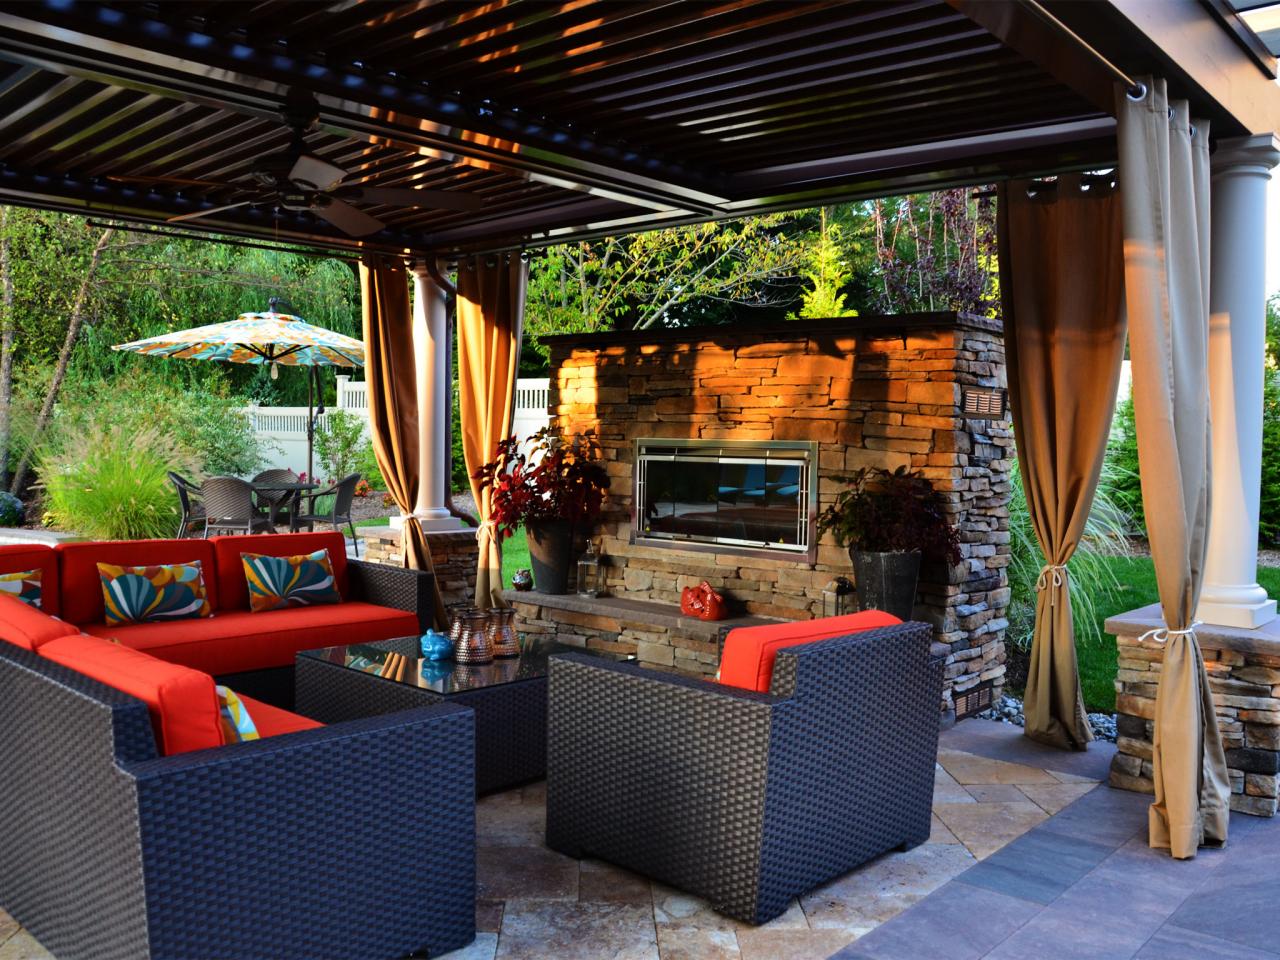 Gather info on outdoor fireplace costs